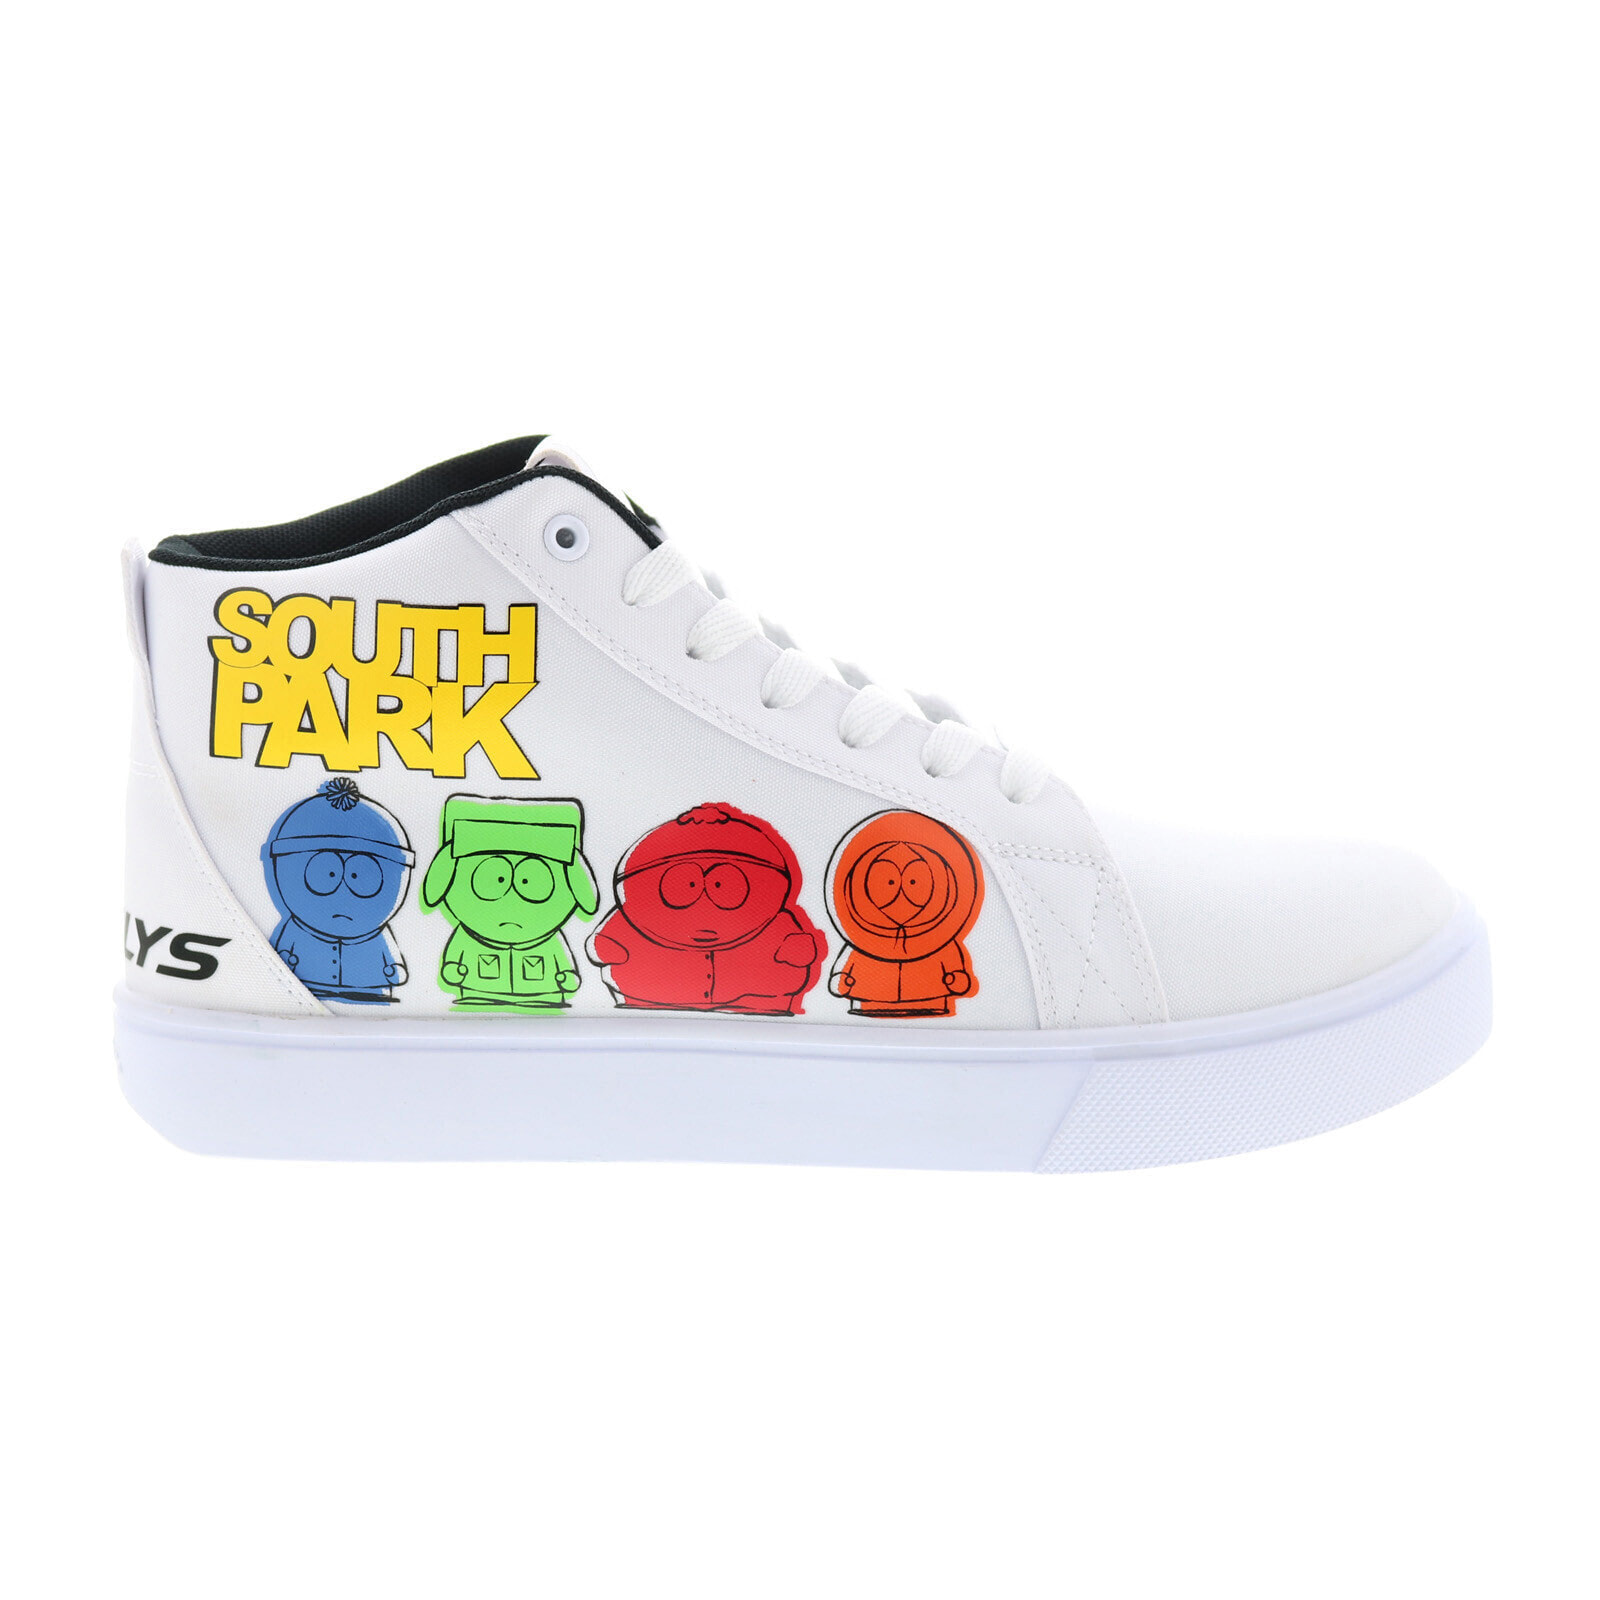 Heelys Racer Mid South Park HES10670M Mens White Lifestyle Sneakers Shoes